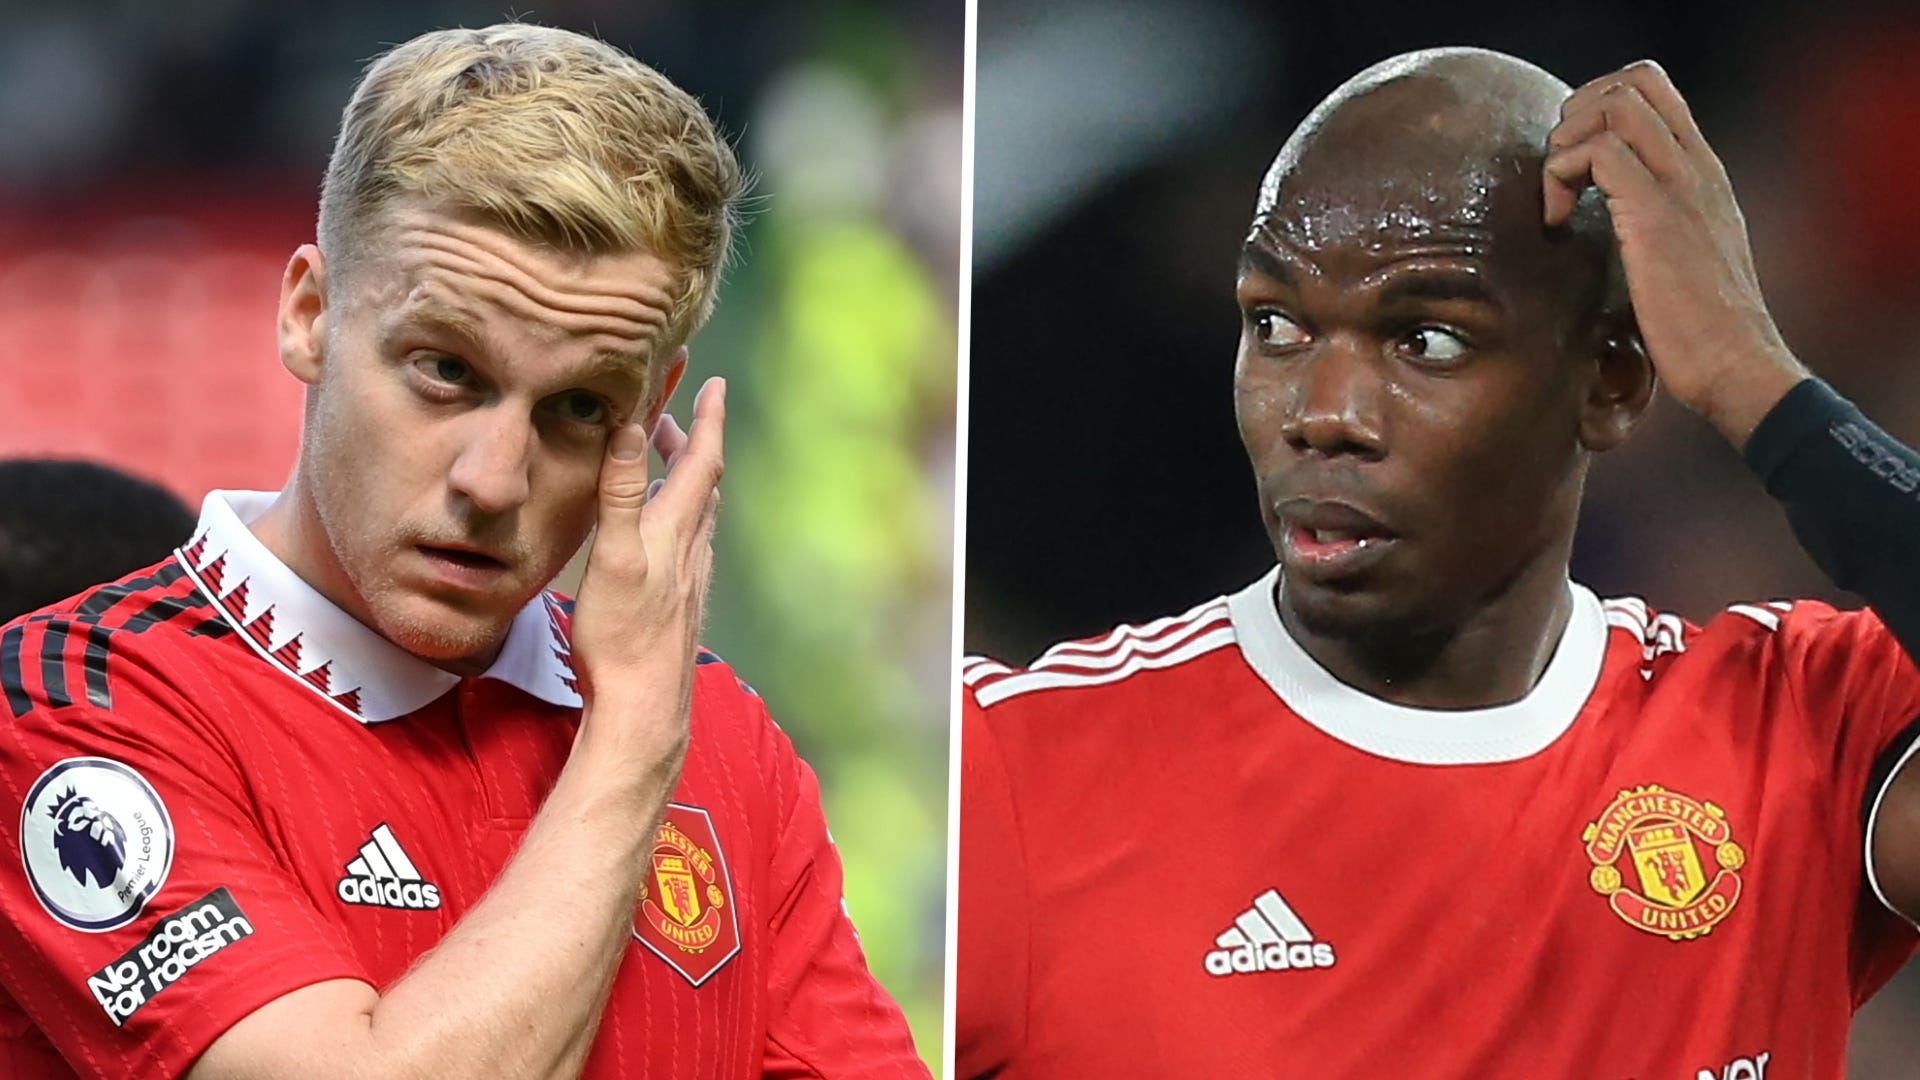 Van de Beek sought Man Utd exit after watching Pogba play ahead of him despite turning up late to training, says former agent | Goal.com UK